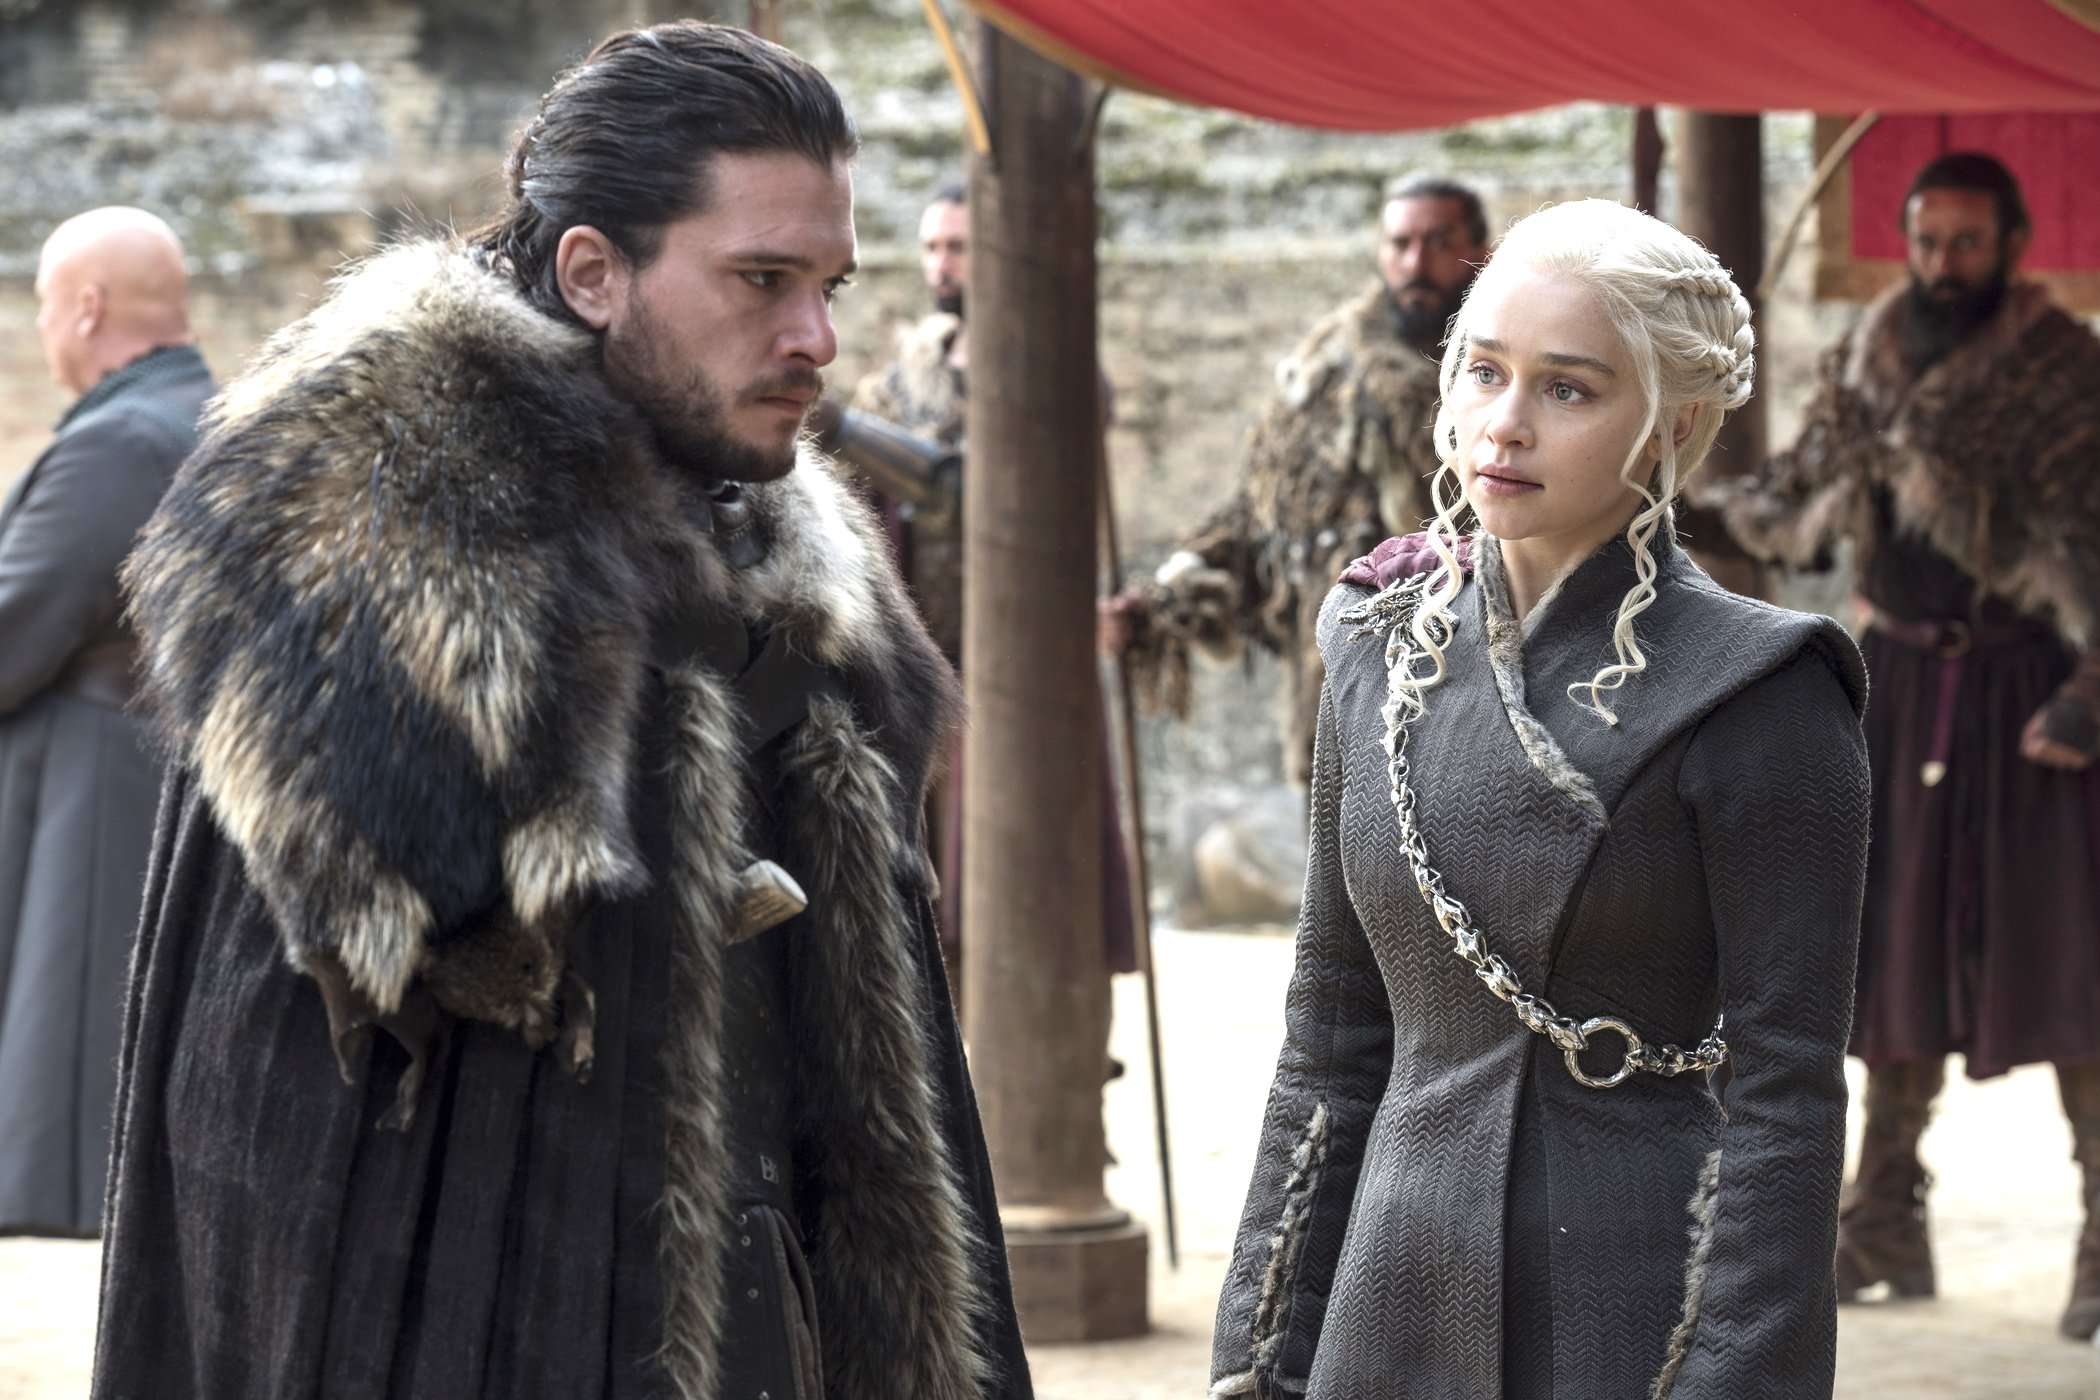 image for ‘Game of Thrones’ Prequels Won’t Premiere Until At Least 2020, HBO Boss Confirms